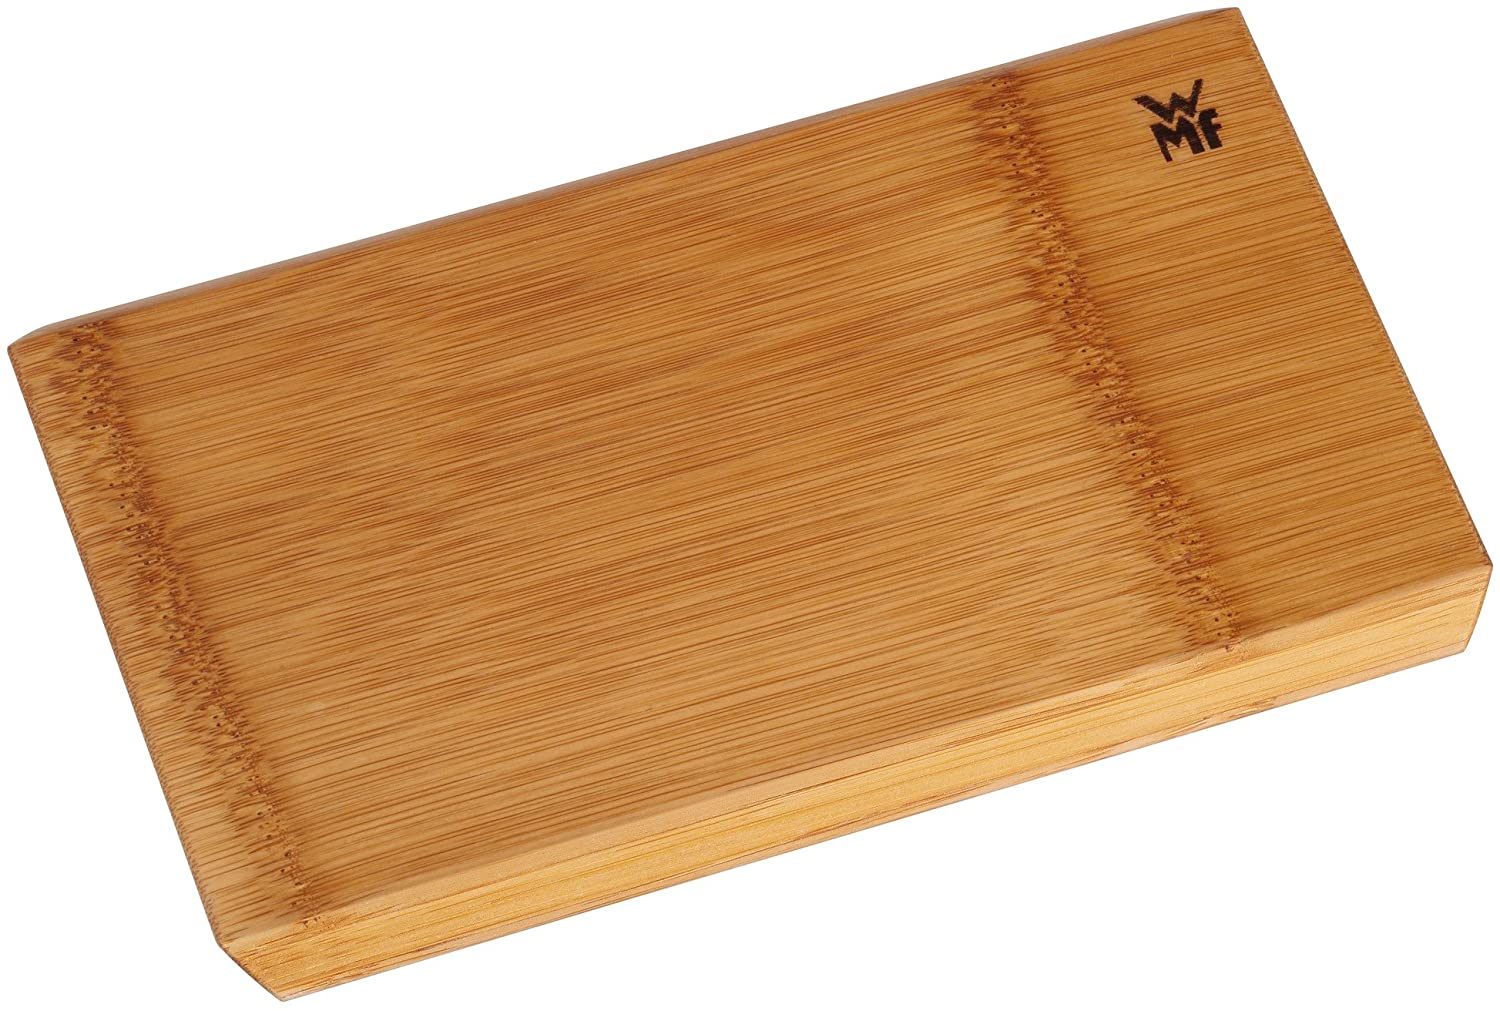 WMF Edge Chopping Board, Small, 24 x 16 x 1.5 cm, Natural Bamboo, Rectangular Wooden Board, Kitchen Board, Gentle on Blades, Serving Board with Slanted Edges